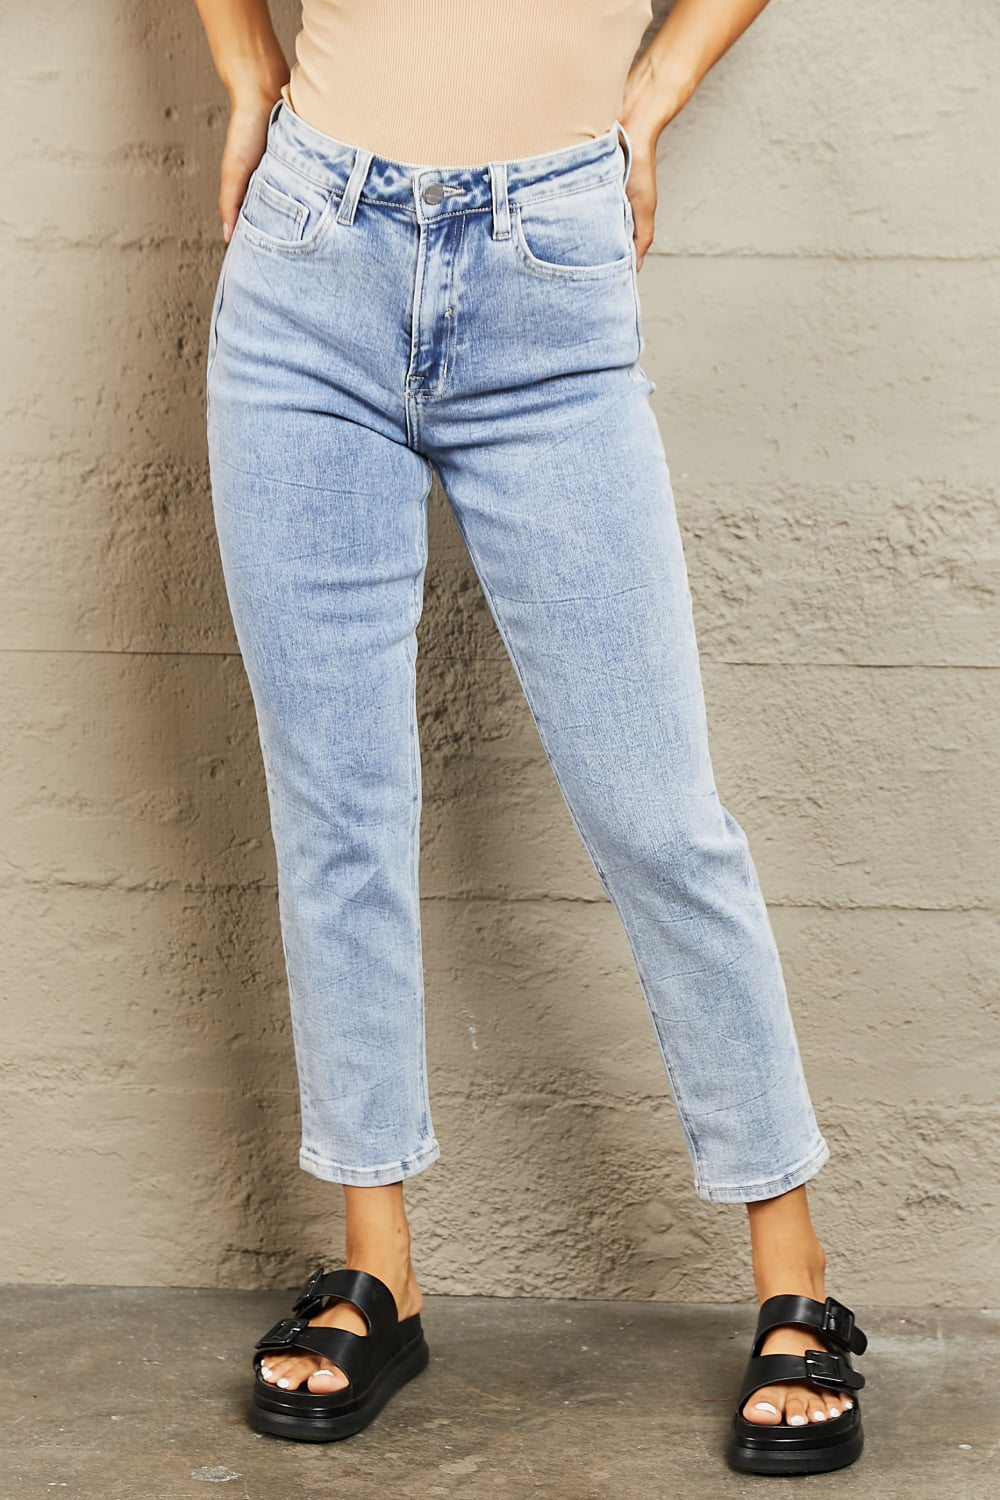 BAYEAS High Waisted Skinny Jeans - Jeans - FITGGINS